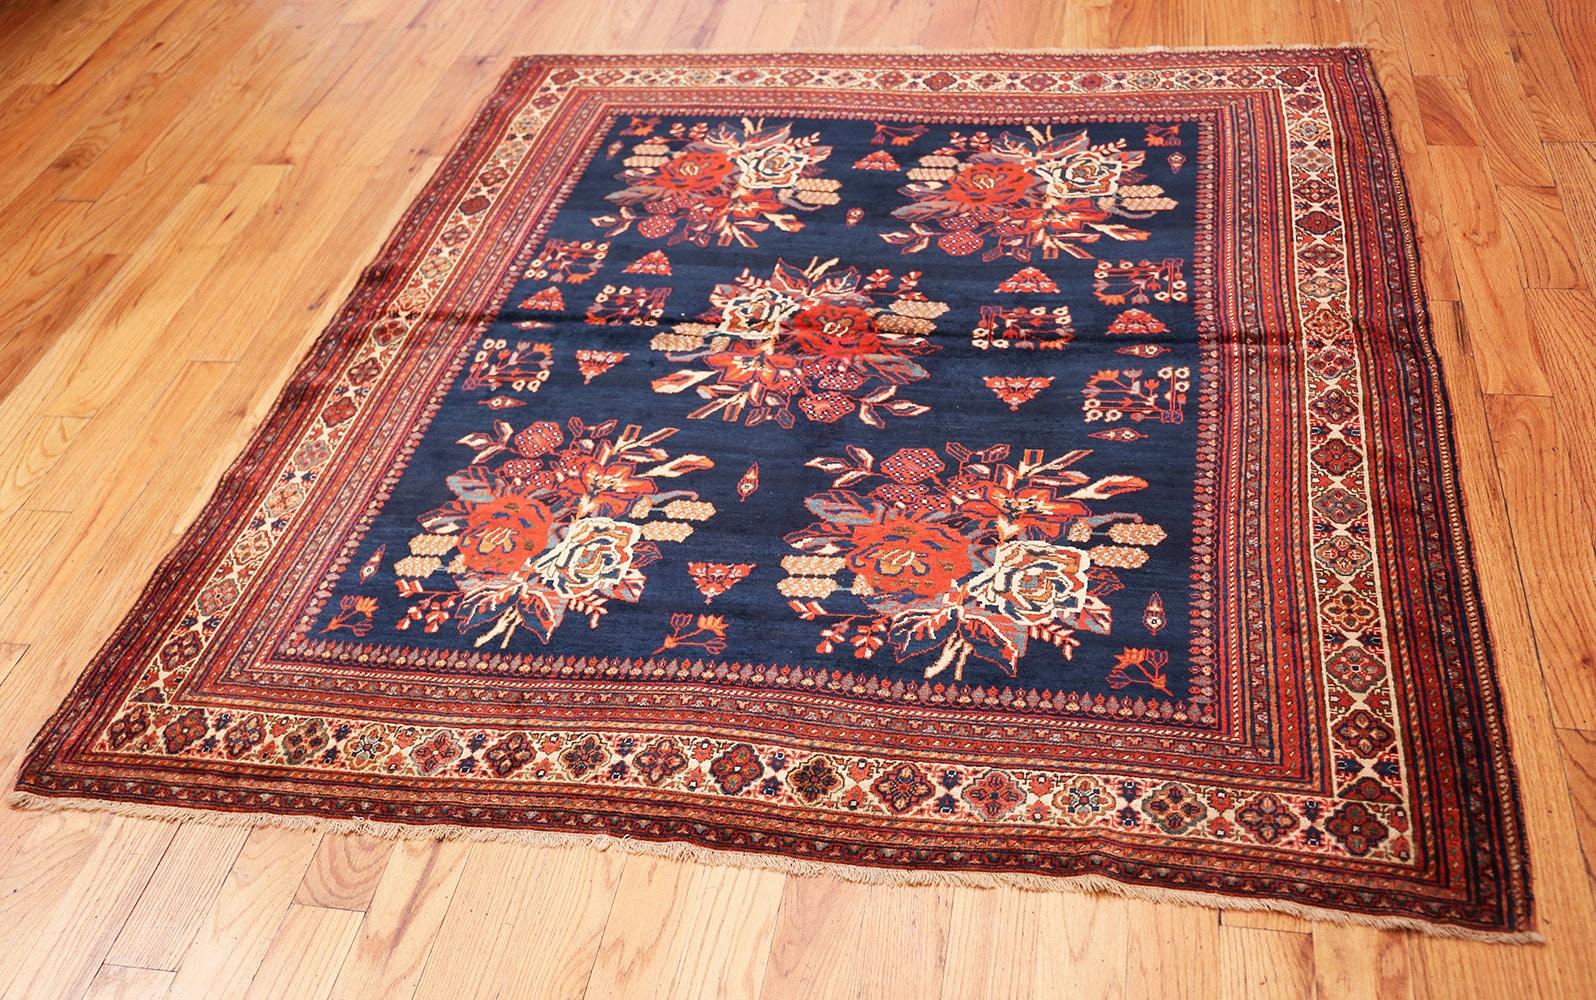 Hand-Knotted Square Antique Persian Afshar Rug. Size: 5 ft 2 in x 5 ft 8 in (1.57 m x 1.73 m)